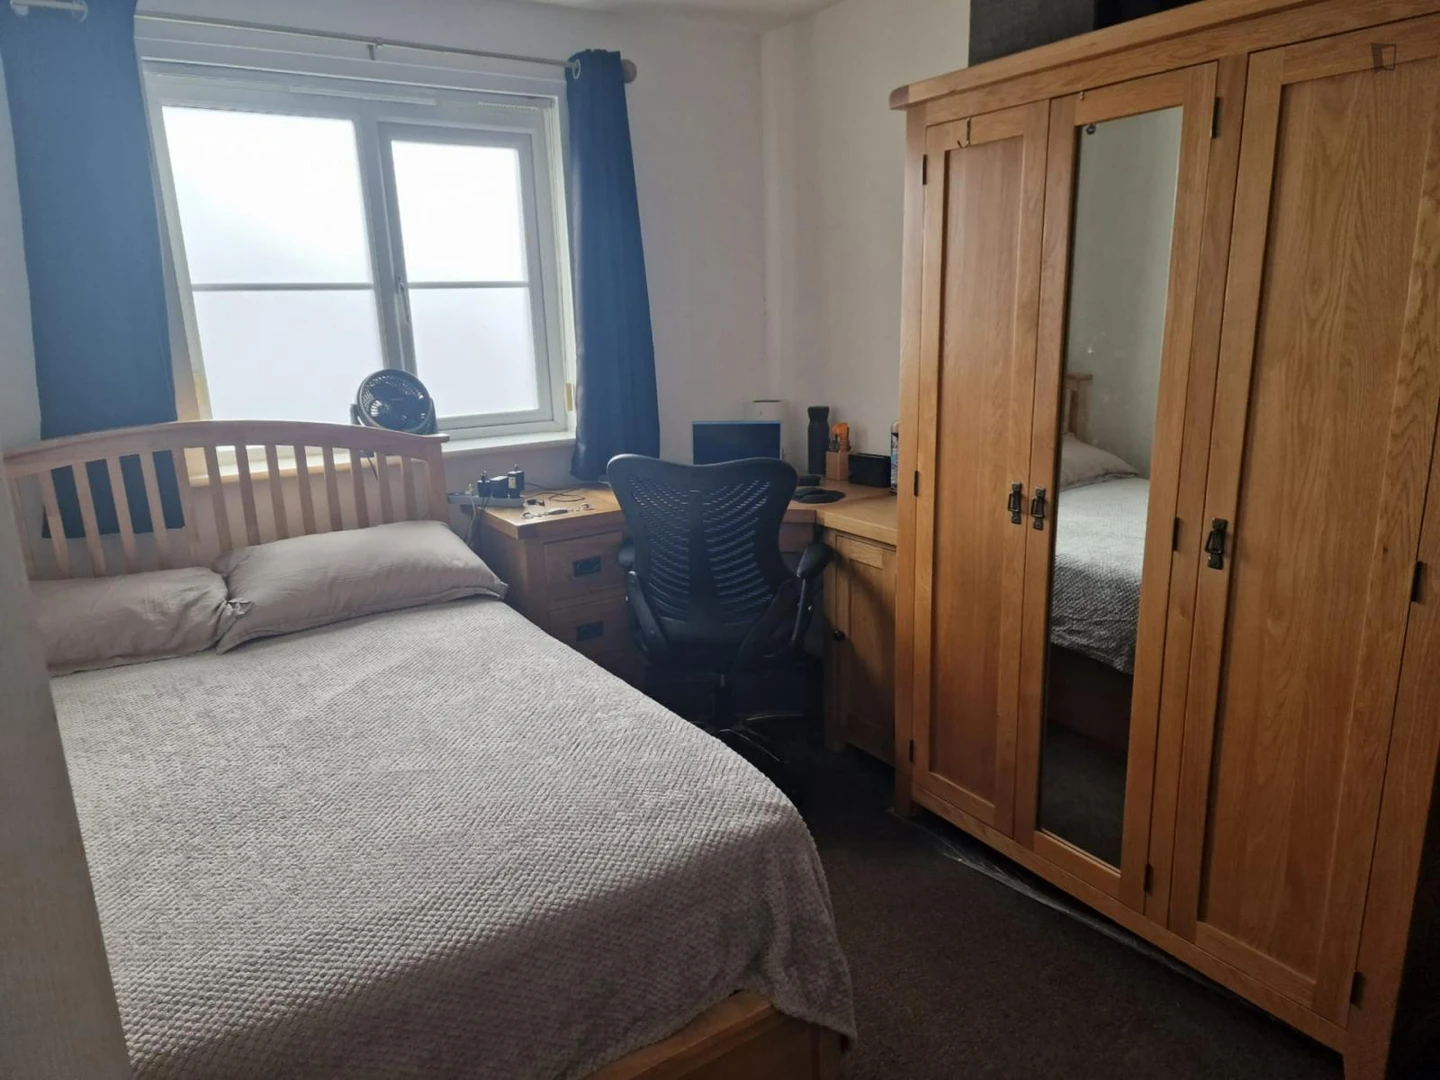 Room for rent in a shared flat in manchester